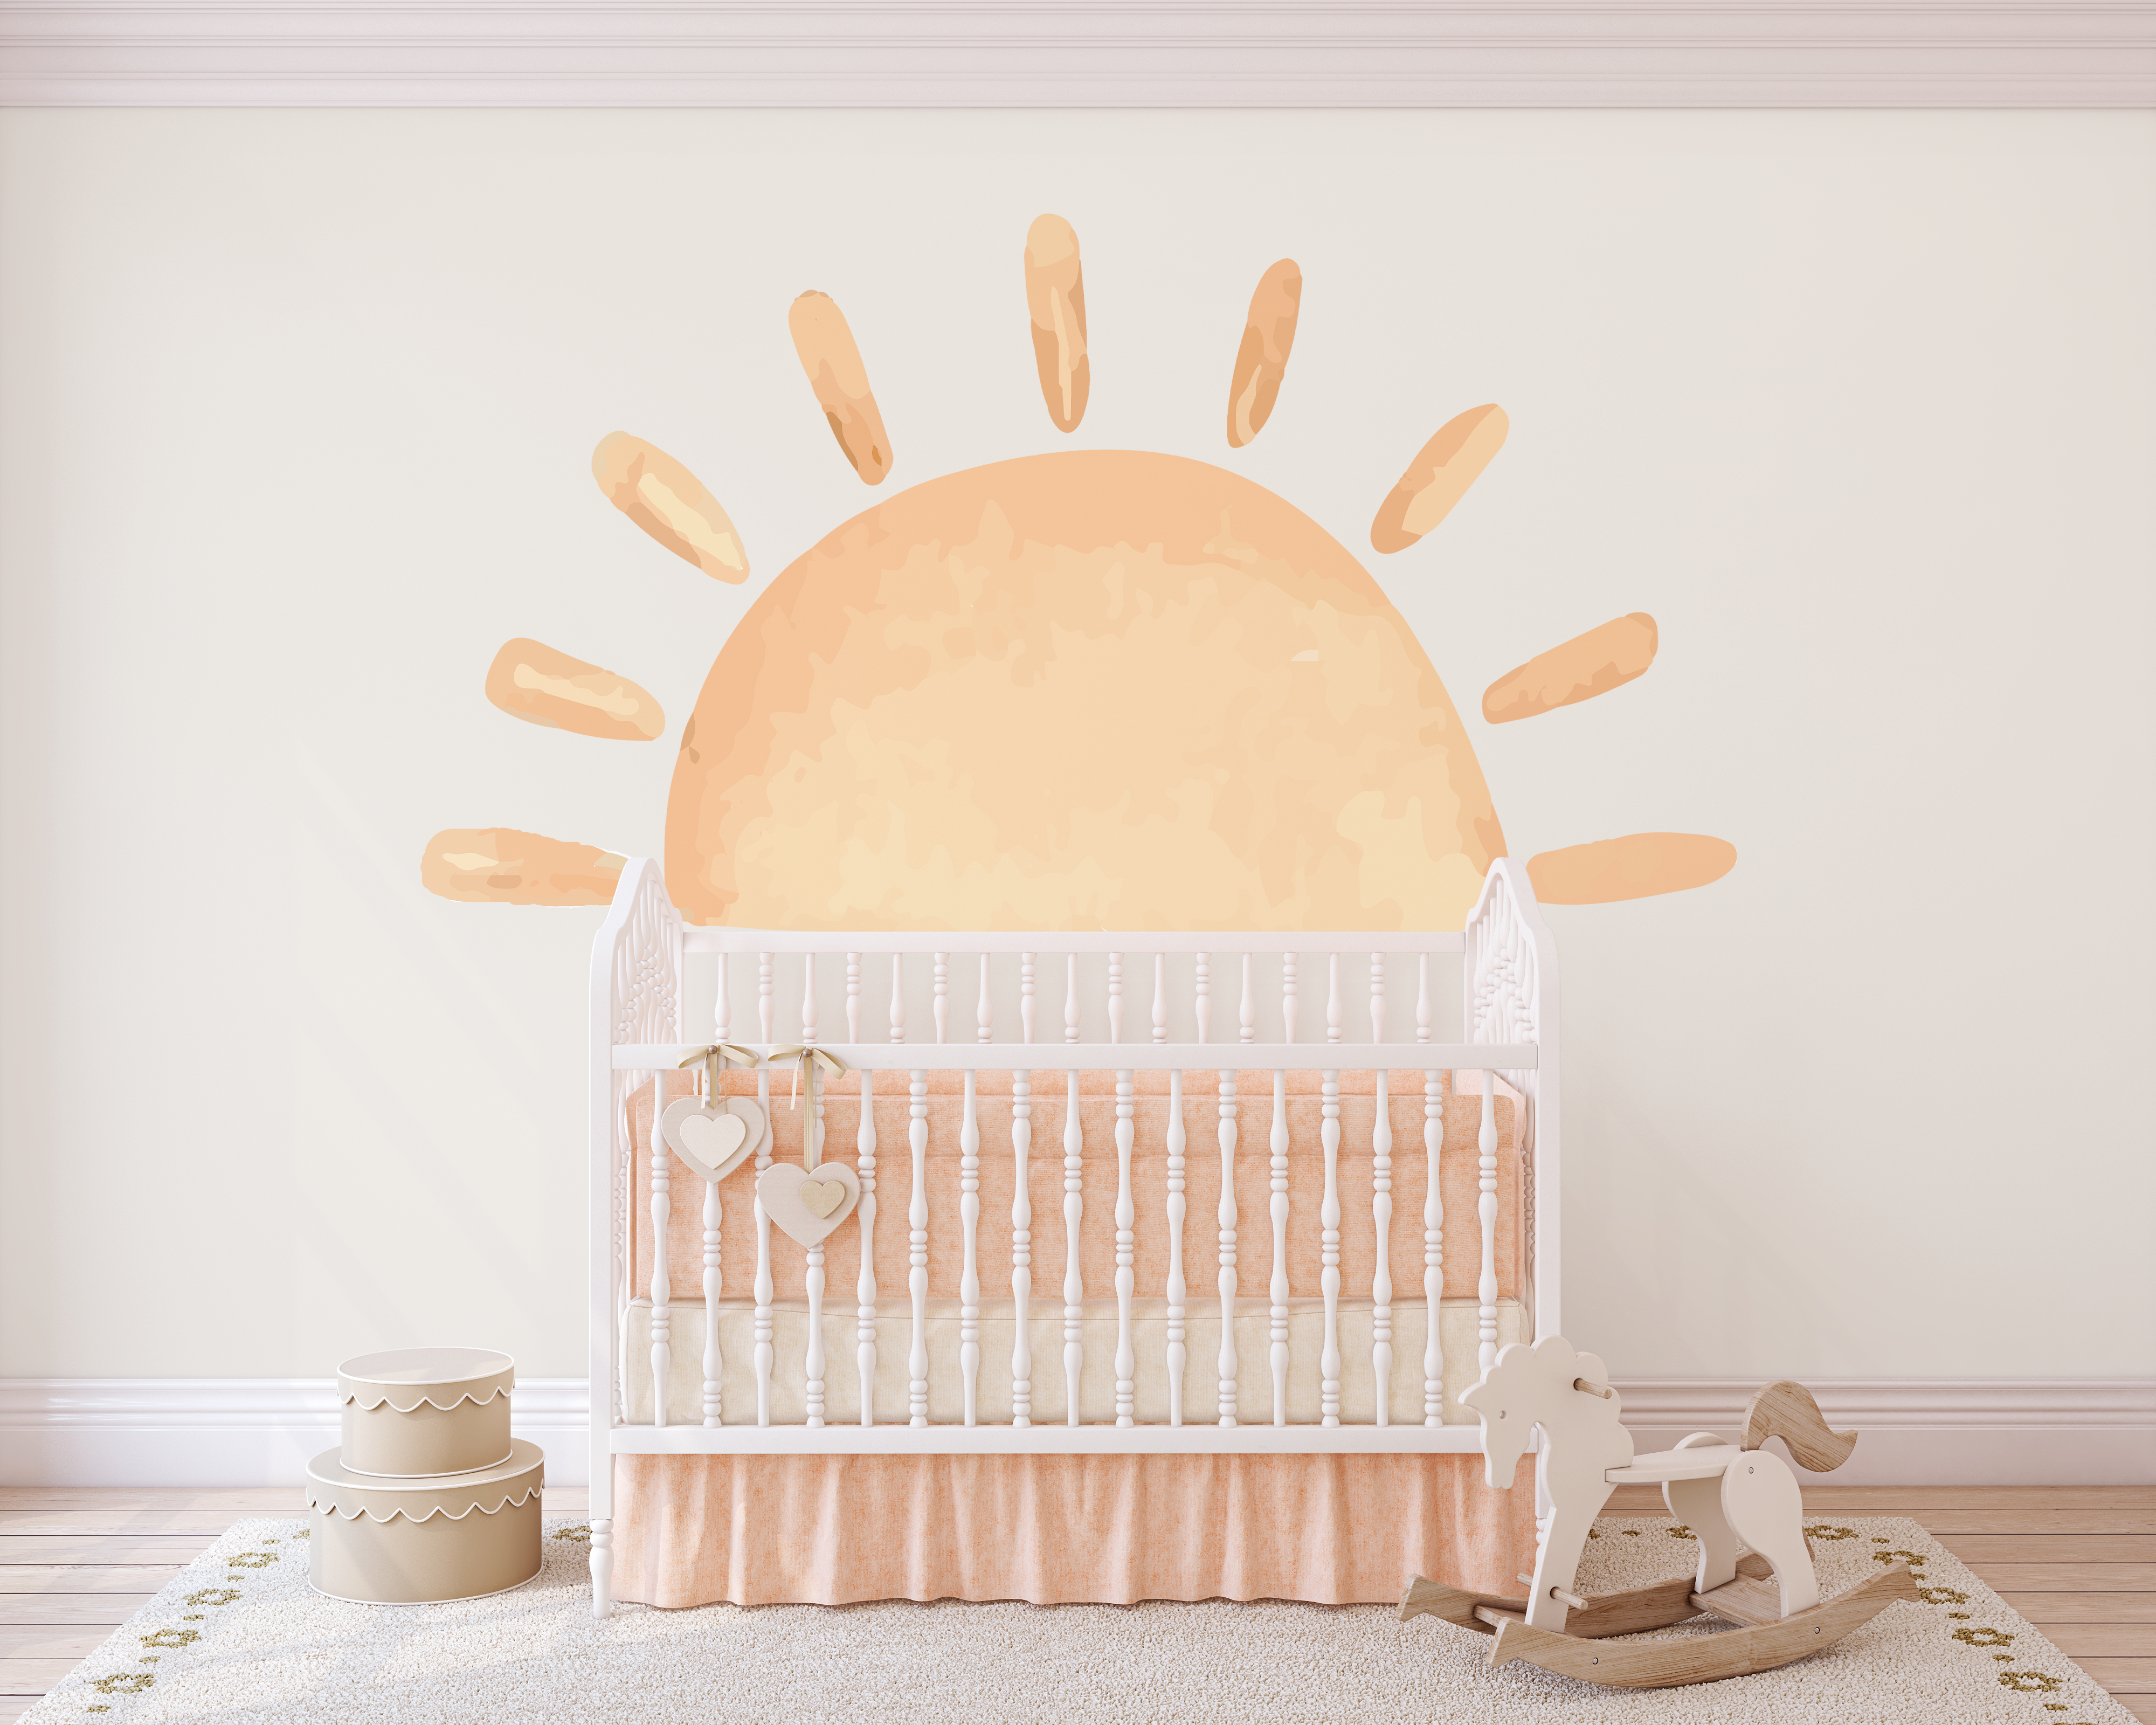 White crib in a nursery with a sunshine wall sticker, rocking horse beside.